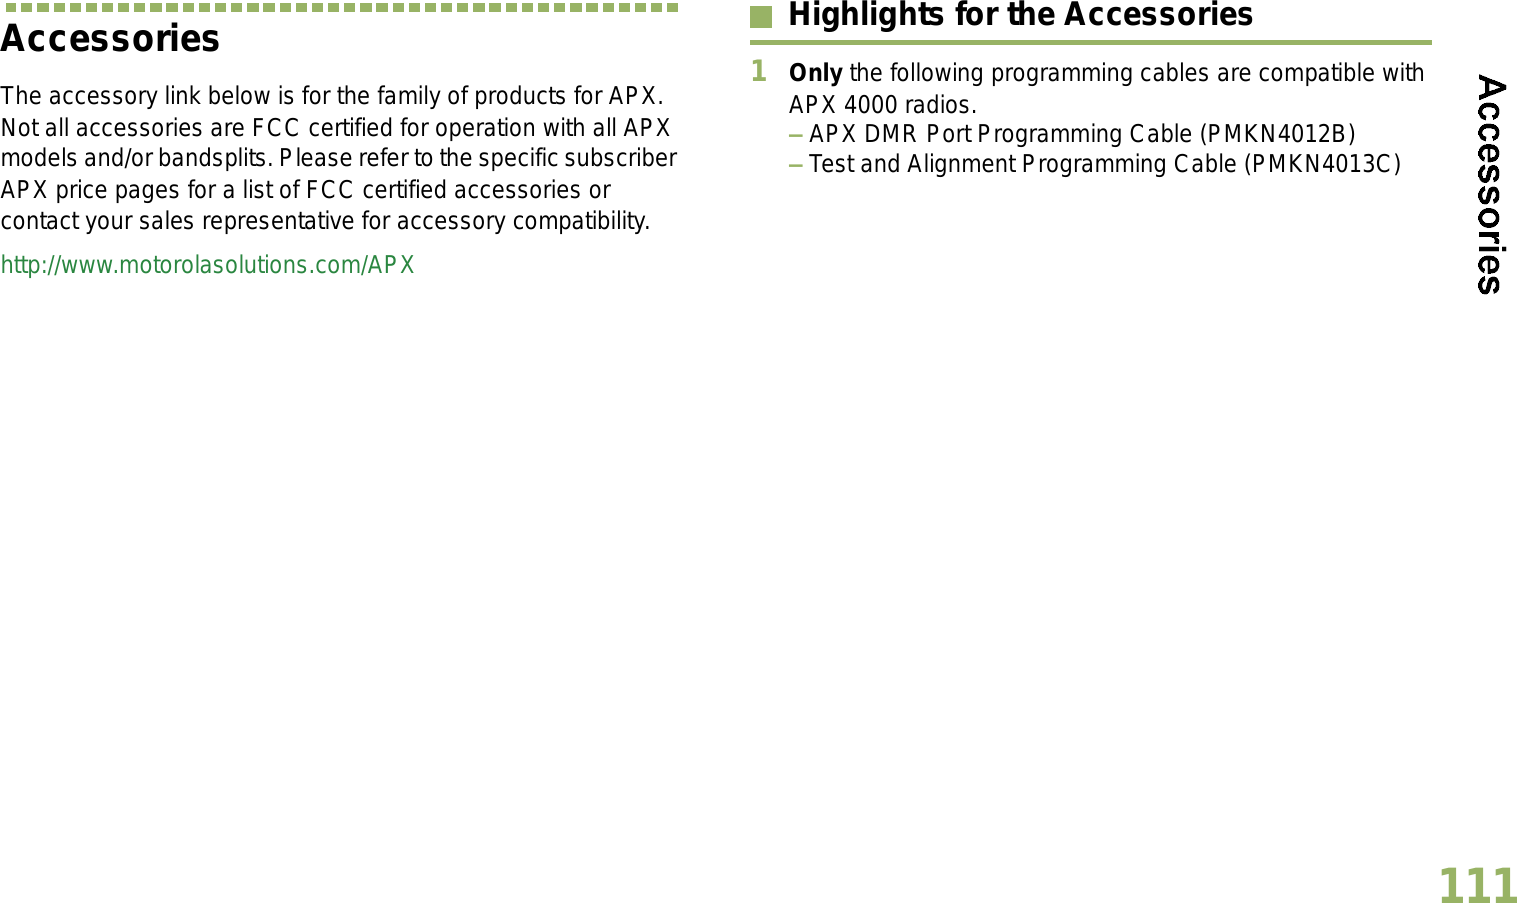 English111AccessoriesThe accessory link below is for the family of products for APX. Not all accessories are FCC certified for operation with all APX models and/or bandsplits. Please refer to the specific subscriber APX price pages for a list of FCC certified accessories or contact your sales representative for accessory compatibility.http://www.motorolasolutions.com/APX Highlights for the Accessories1Only the following programming cables are compatible with APX 4000 radios.  APX DMR Port Programming Cable (PMKN4012B) Test and Alignment Programming Cable (PMKN4013C)